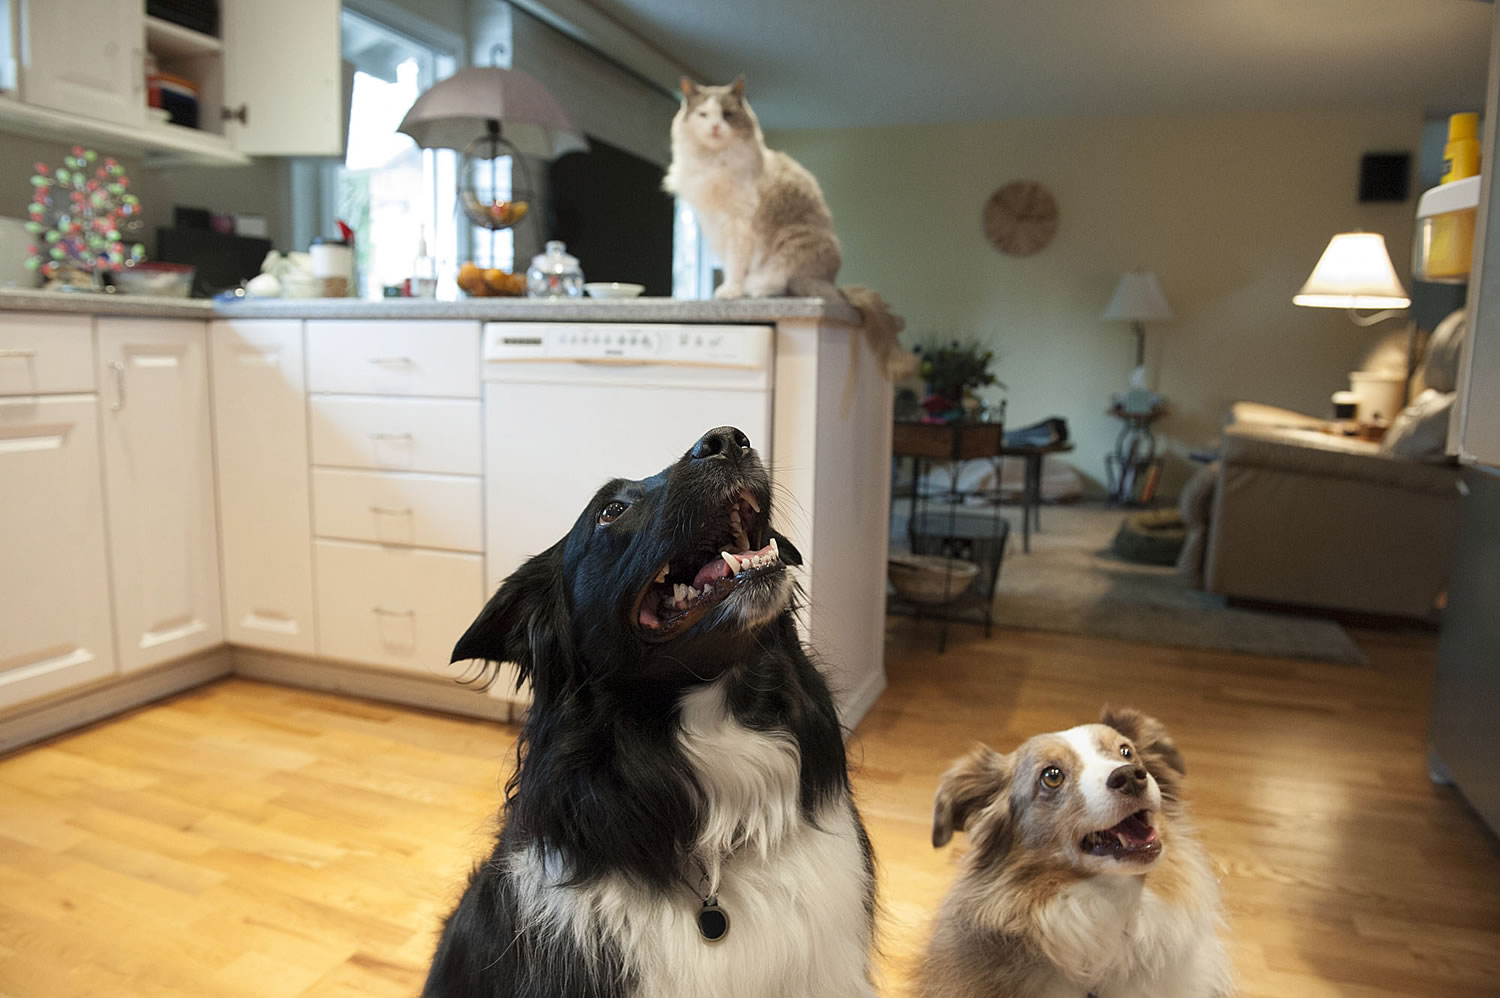 Vancouver City Councilman Jack Burkman offers treats to his Australian shepherd, Tazzy, 5, left, and mini-Australian shepherd, Rusty, 8, as his ragdoll kitty, Missy, 16, looks on at his southeast Vancouver home on Dec. 18.